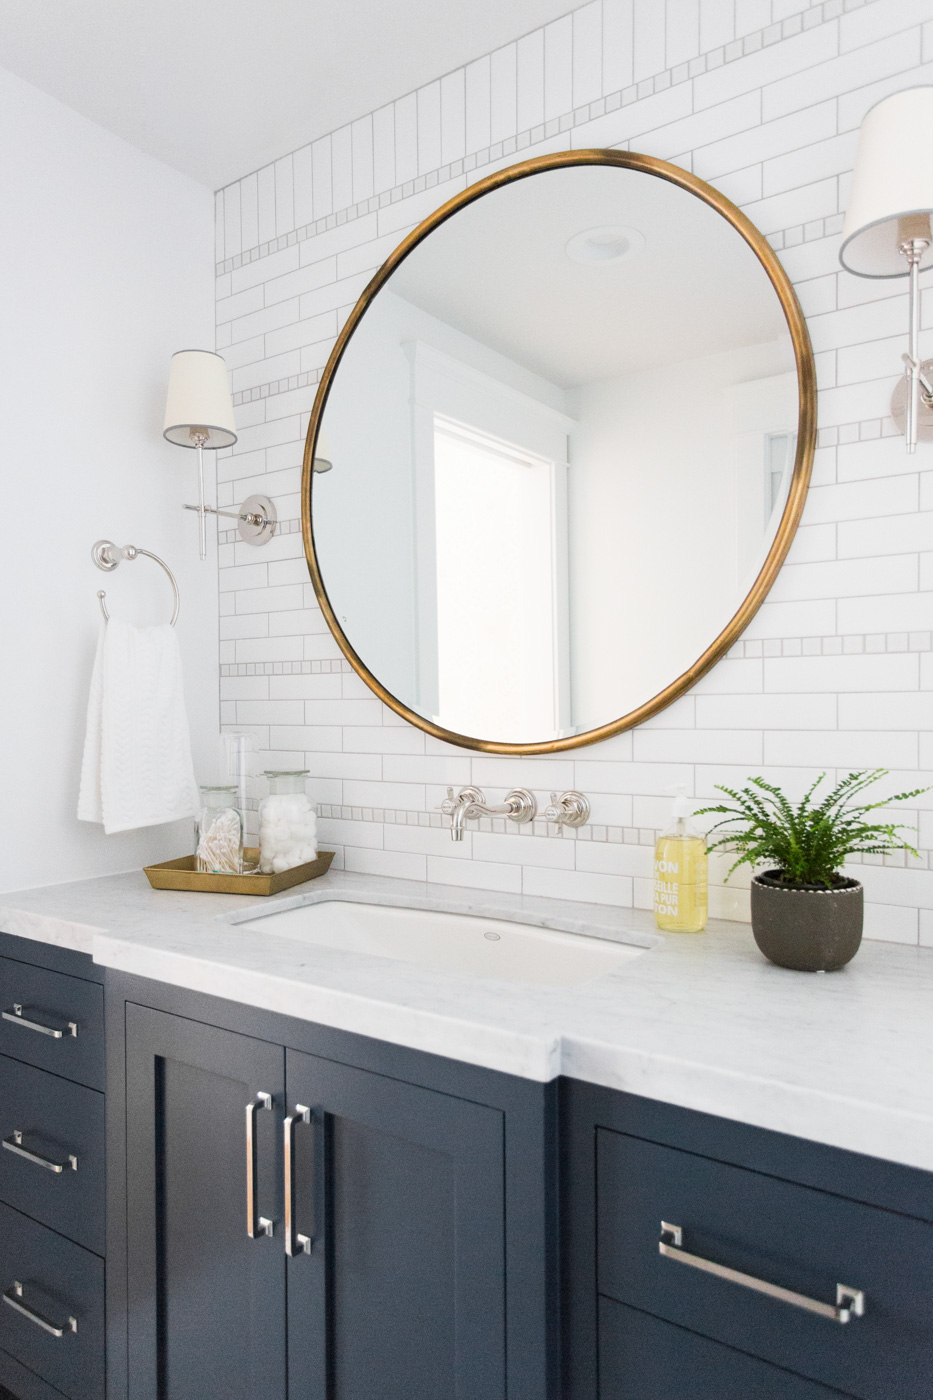 Bathroom Mirrors Are Going Full Circle, Bathroom Vanity With Circle Mirror